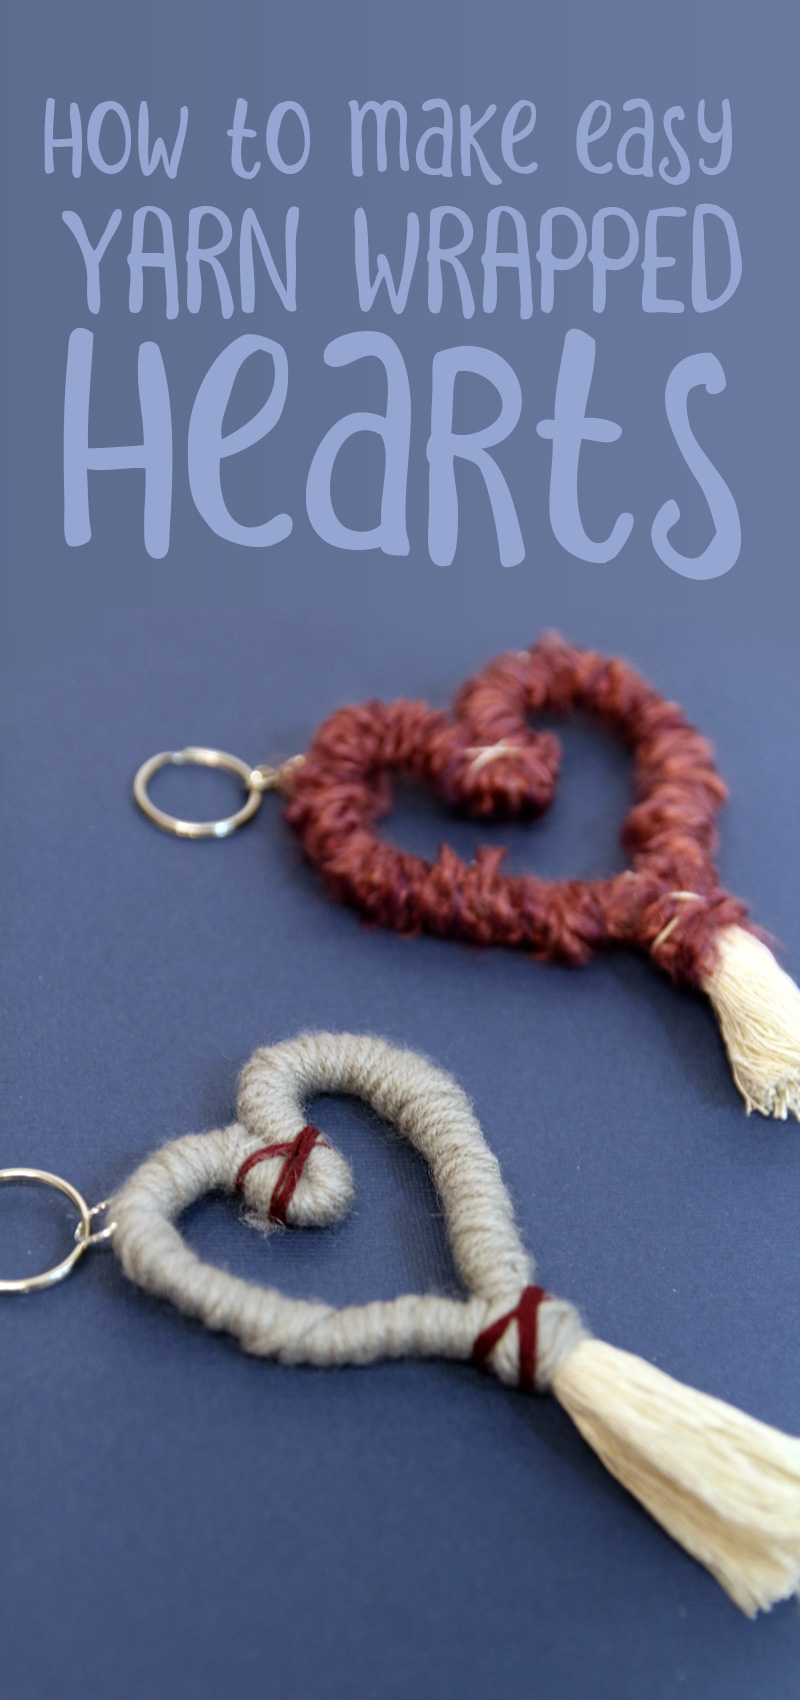 Macrame Heart Keychain single image with text and blue background